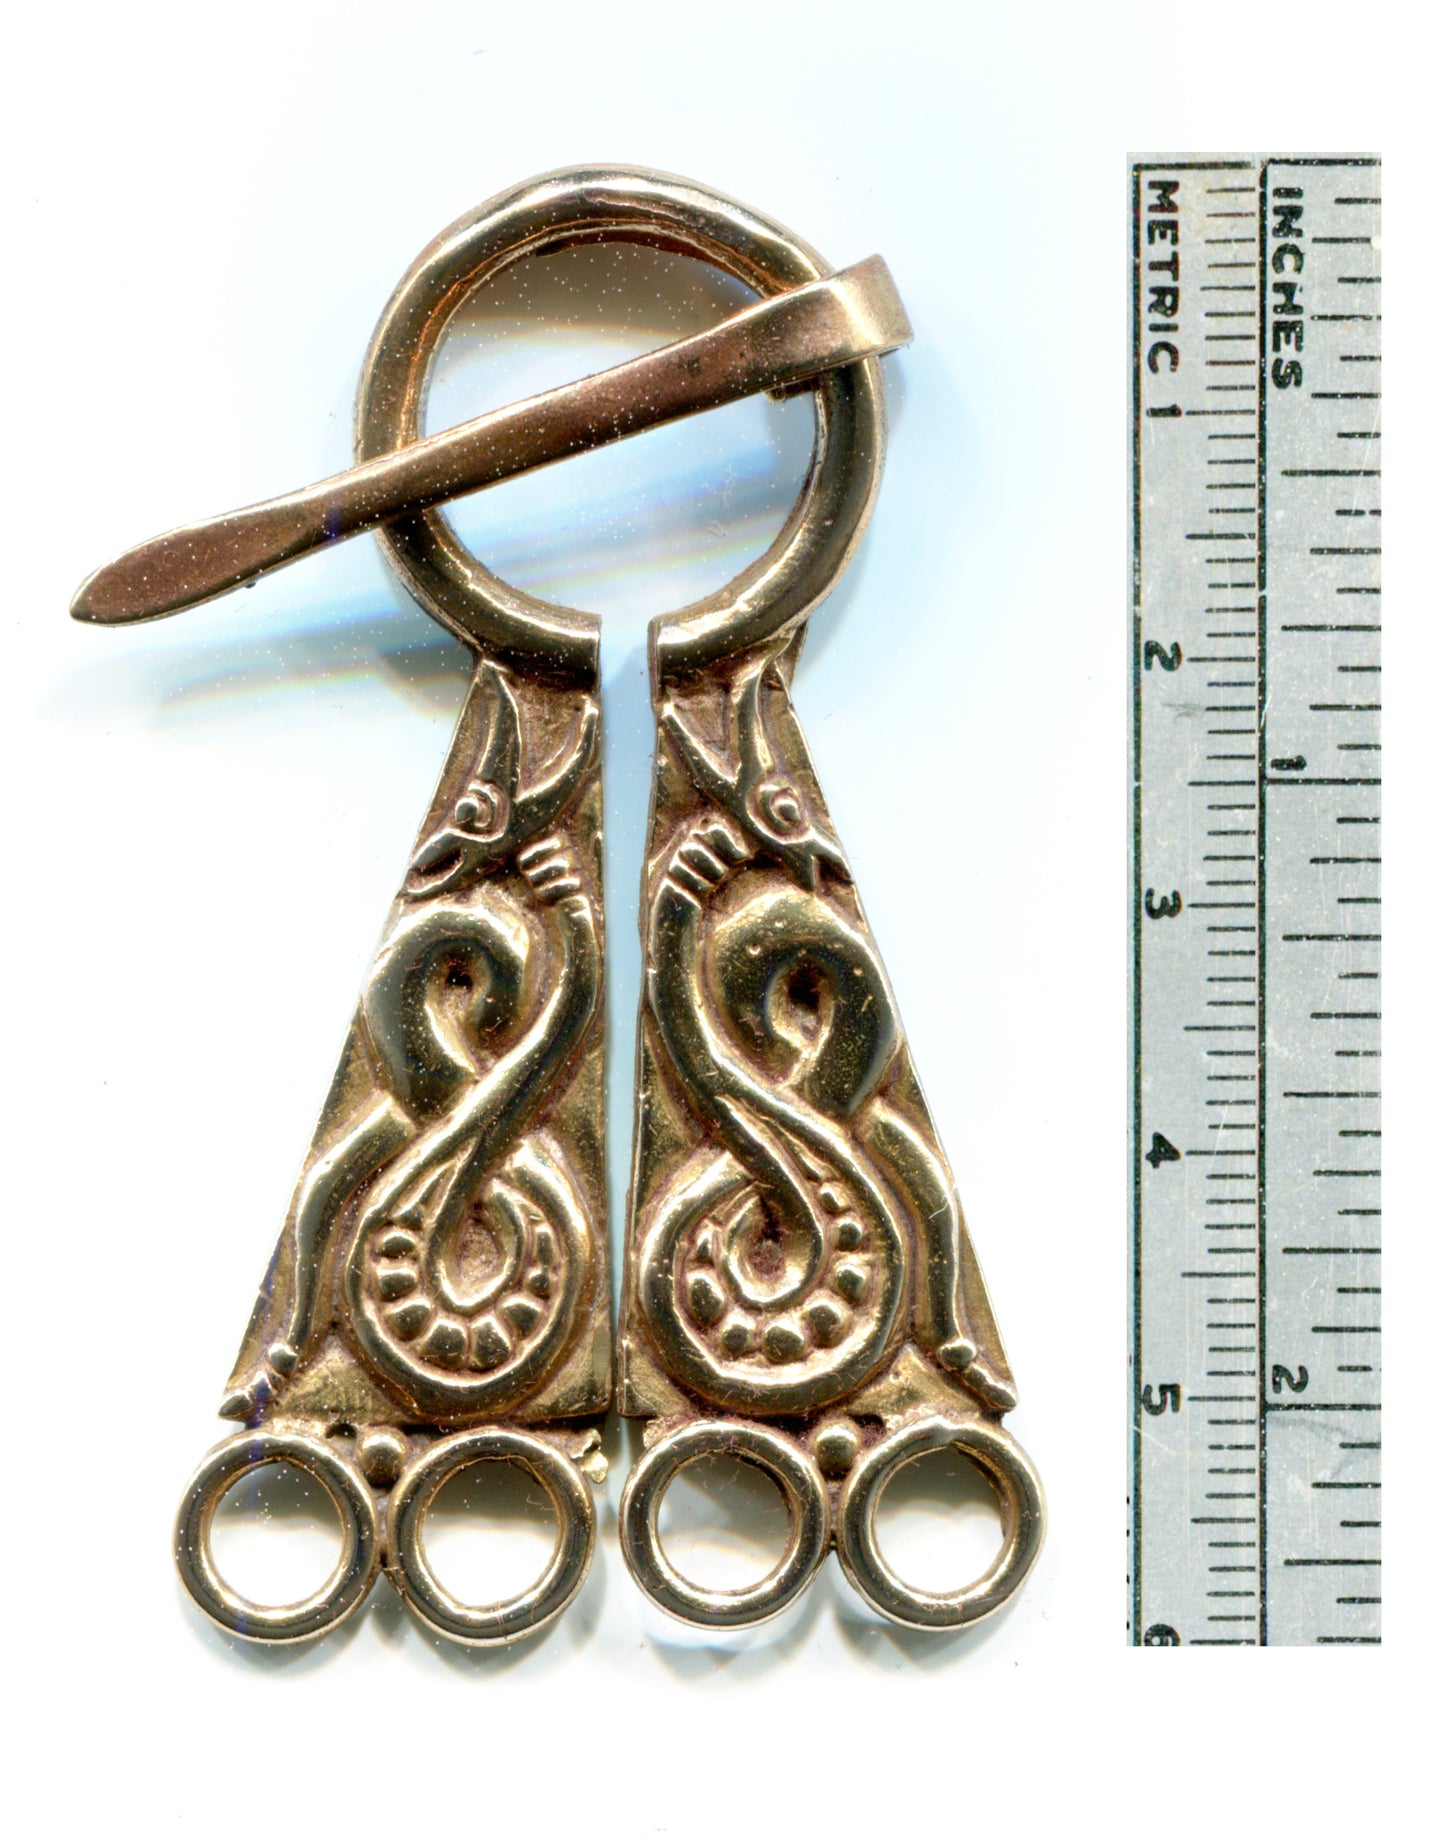 Norse Chatelaine Omega Brooch - 5157B